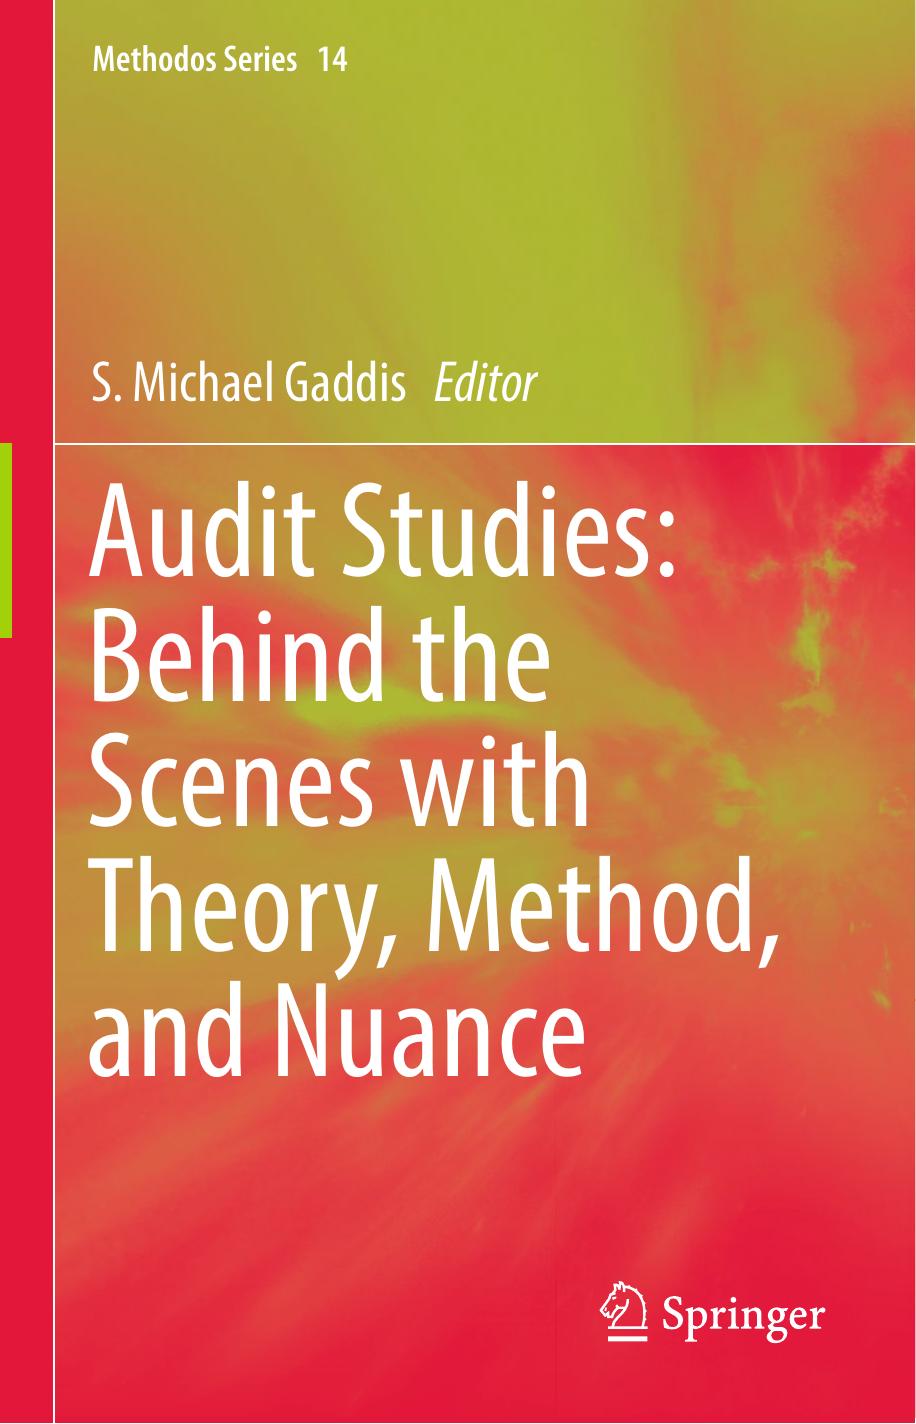 Audit Studies Behind the Scenes with Theory, Method, and Nuance 2018